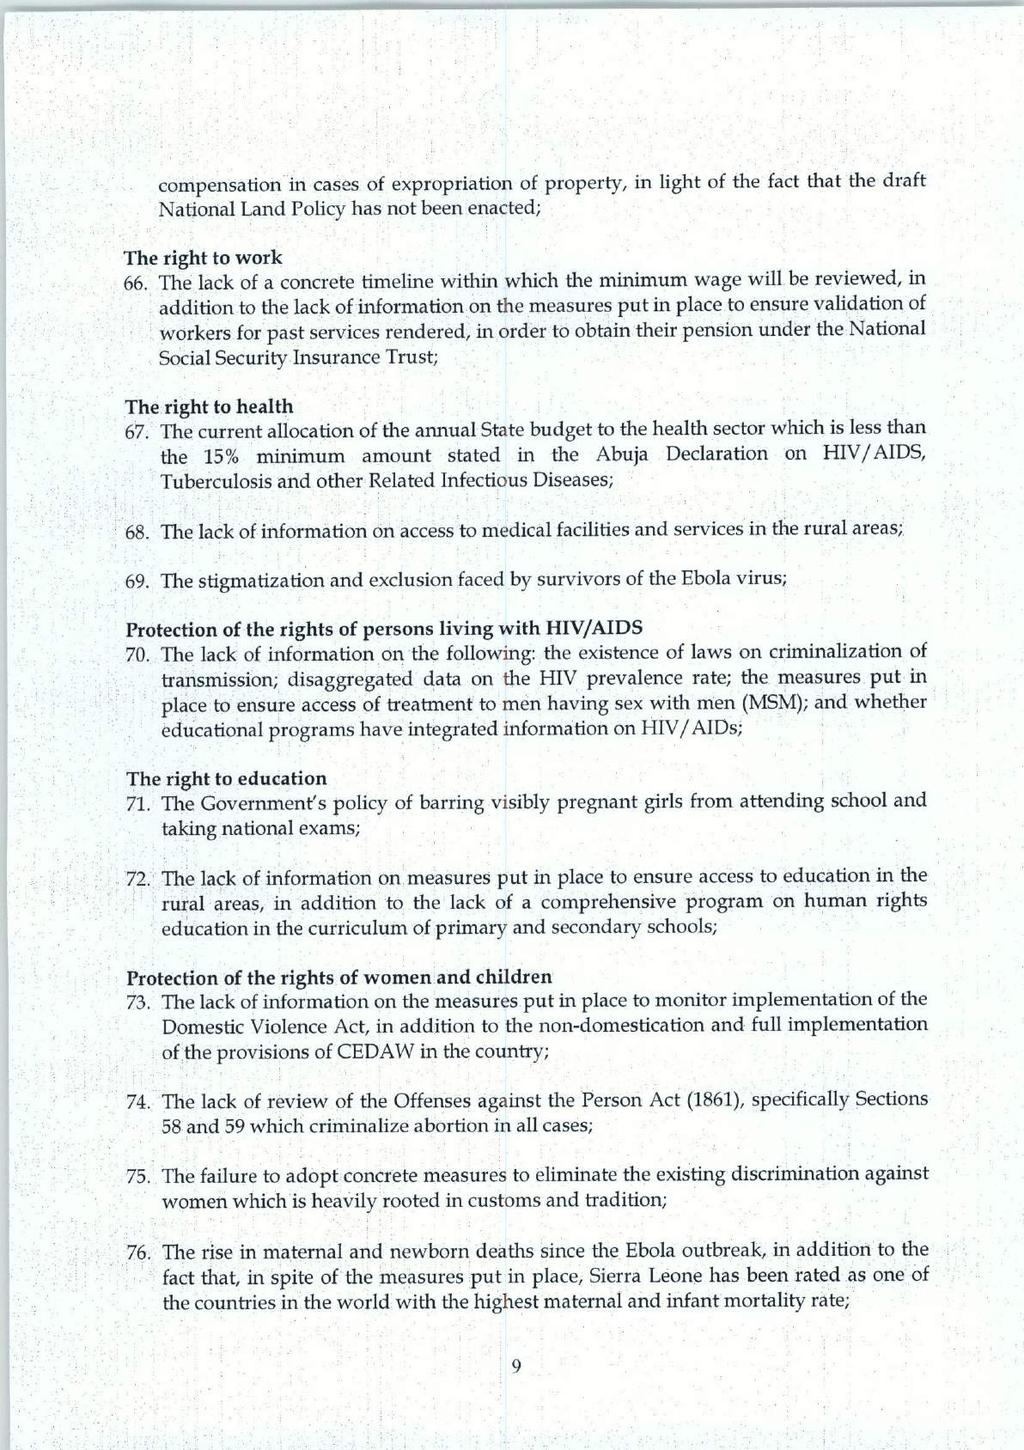 compensation in cases of expropriation of property, in light of the fact that the draft National Land Policy has not been enacted; The right to work 66.